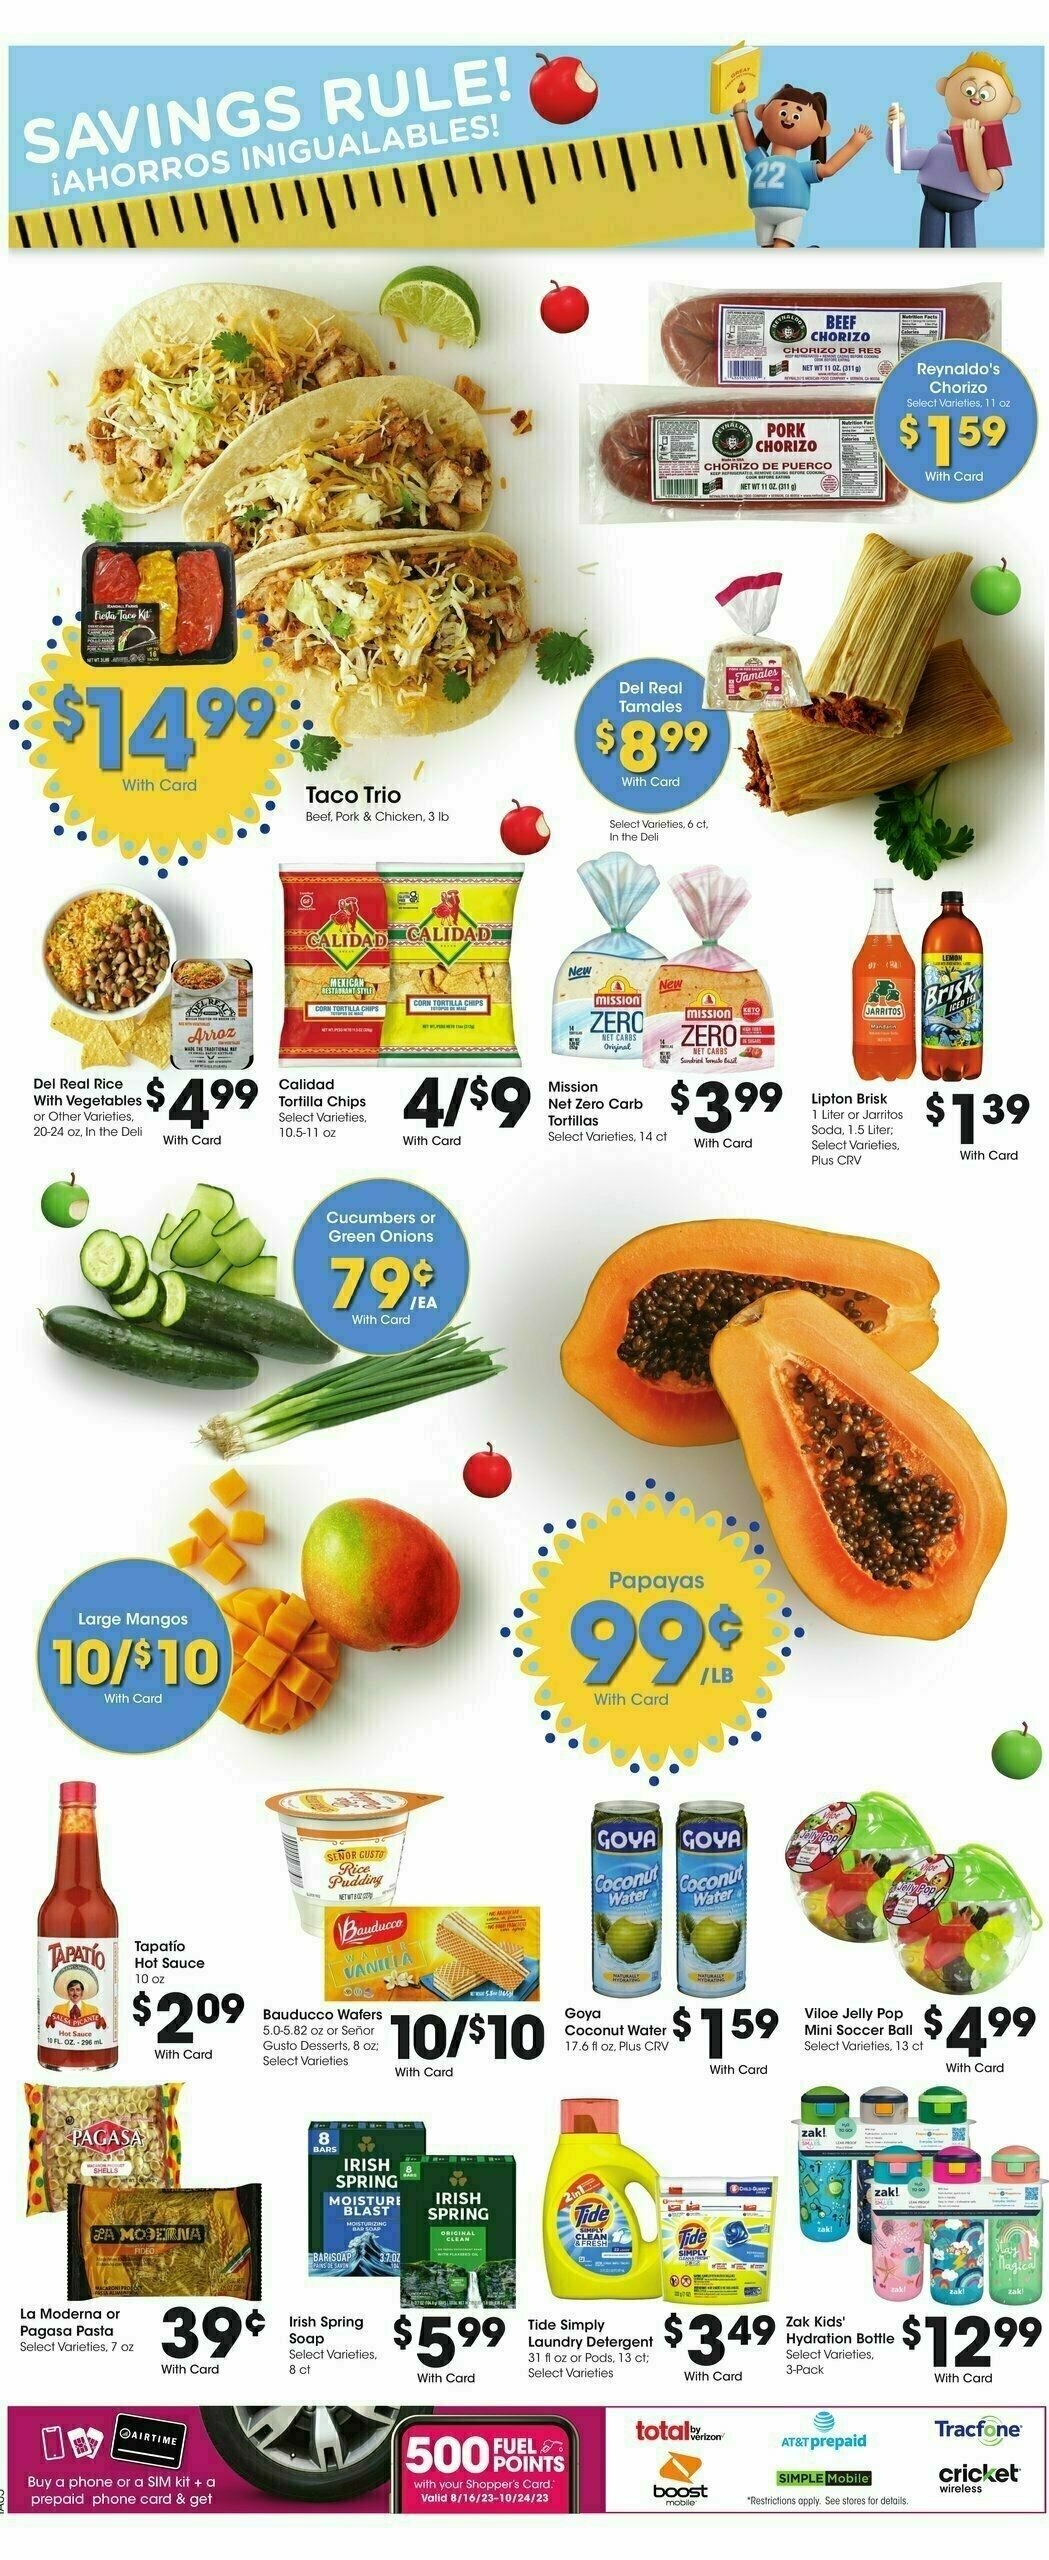 Ralphs Weekly Ad from August 16